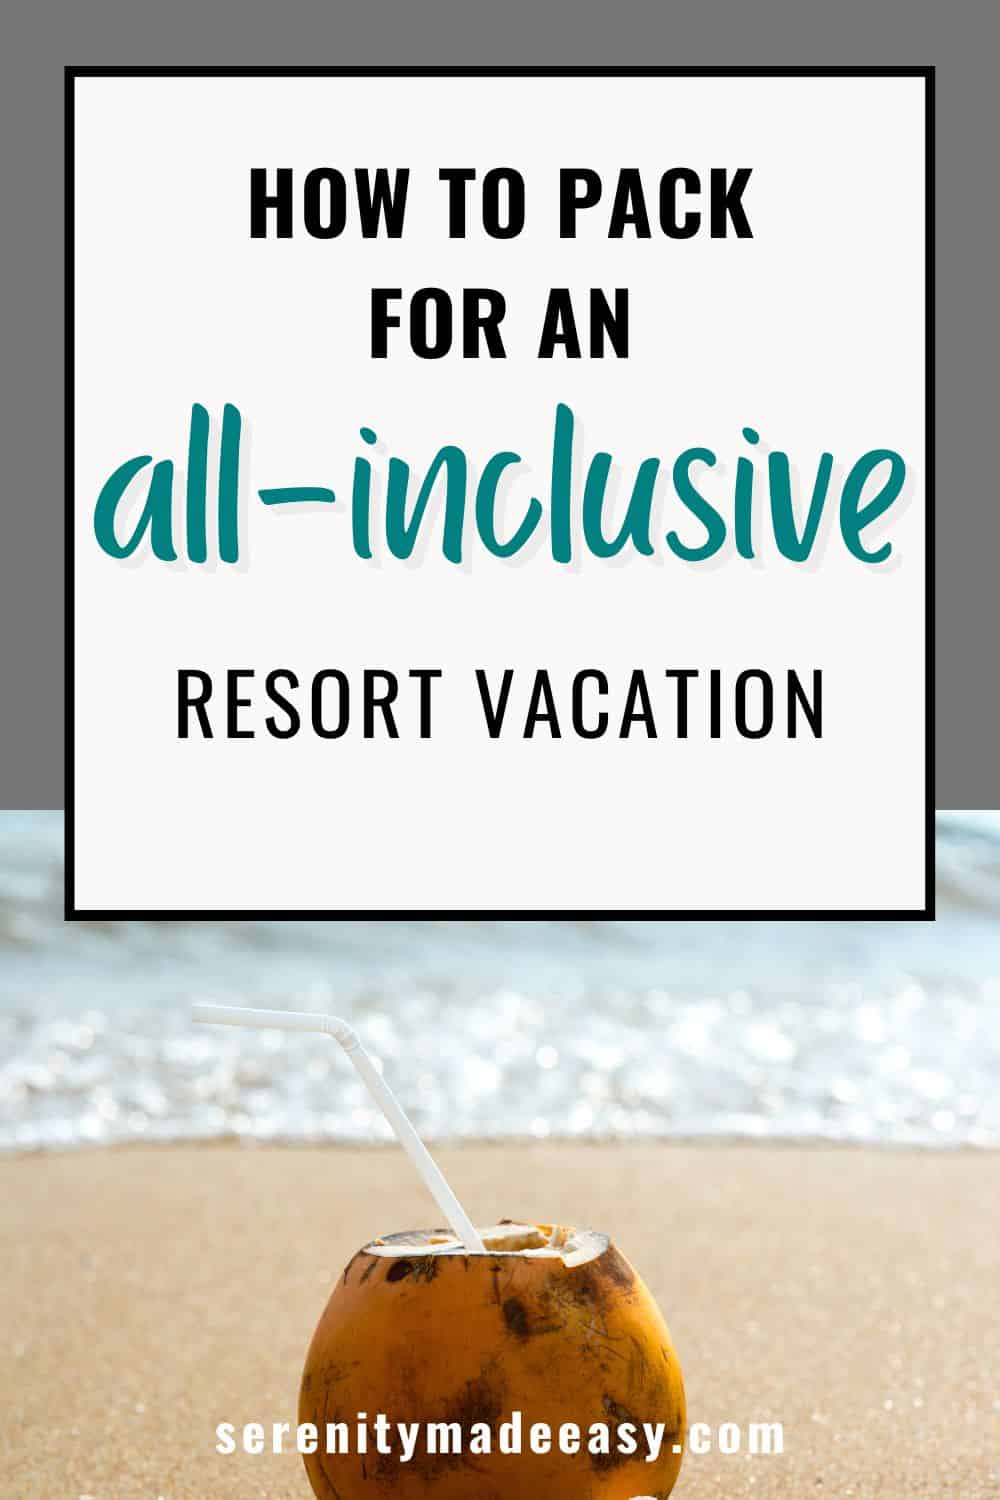 Outstanding allinclusive resort packing list to take away the stress